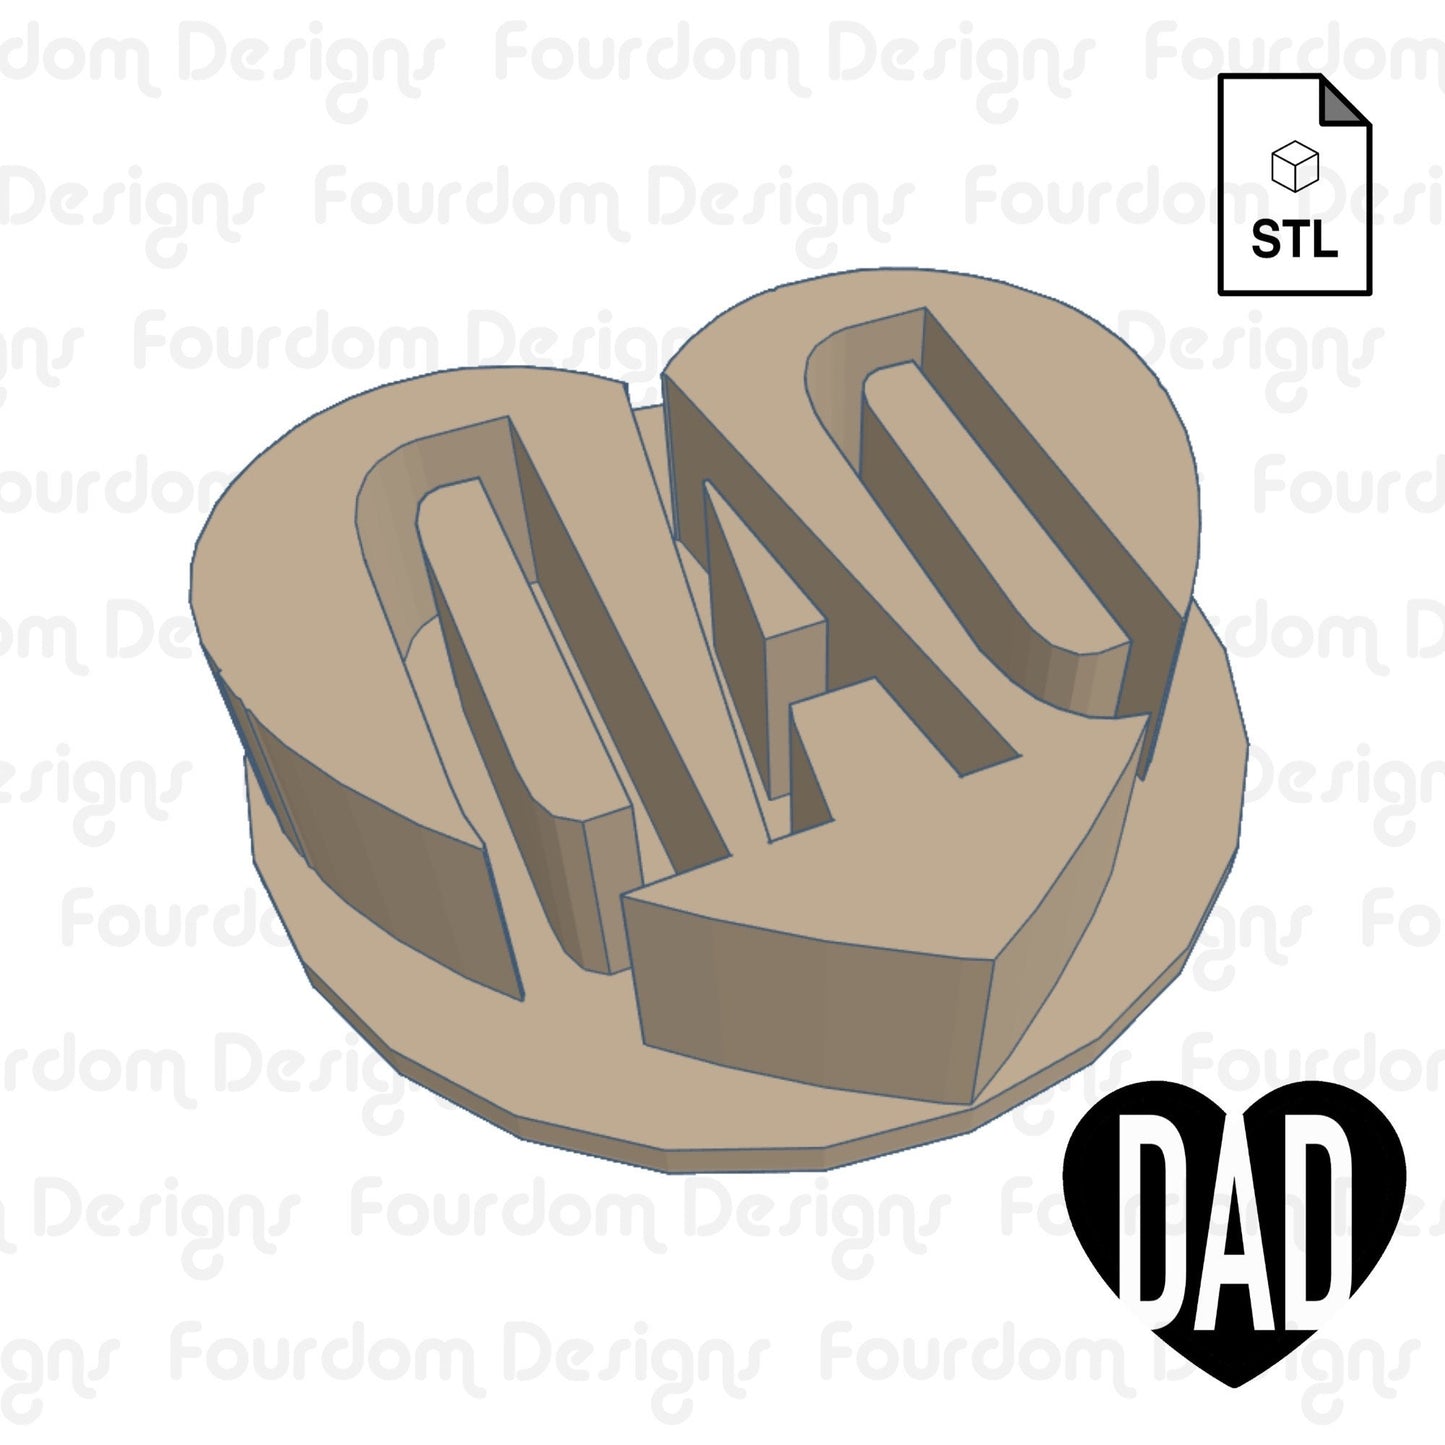 DAD Cookie Imprint Digital Download STL File for Cookie Cutter Fondant Cutter Clay Cutter 3D Model for 3D Printing